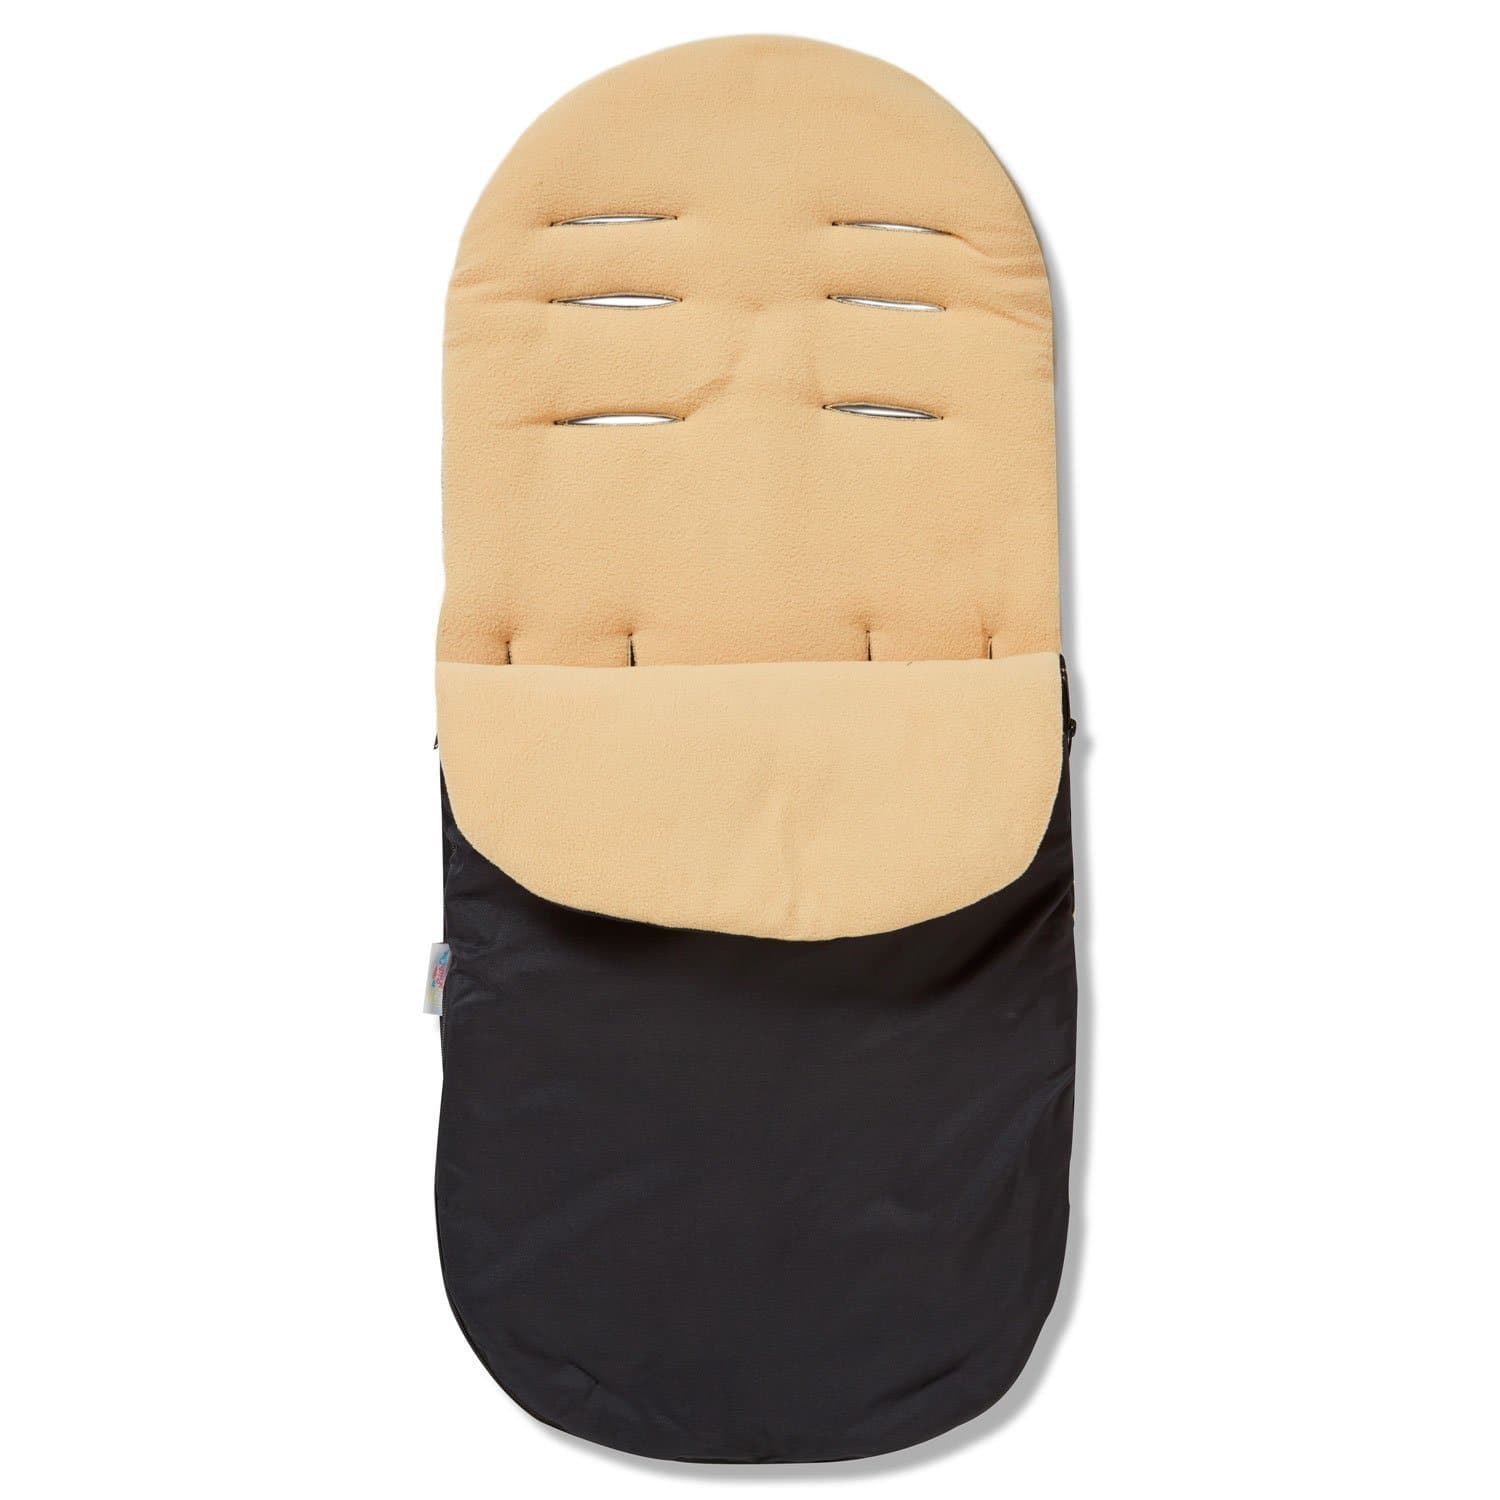 Footmuff / Cosy Toes Compatible with Baby Trend - For Your Little One